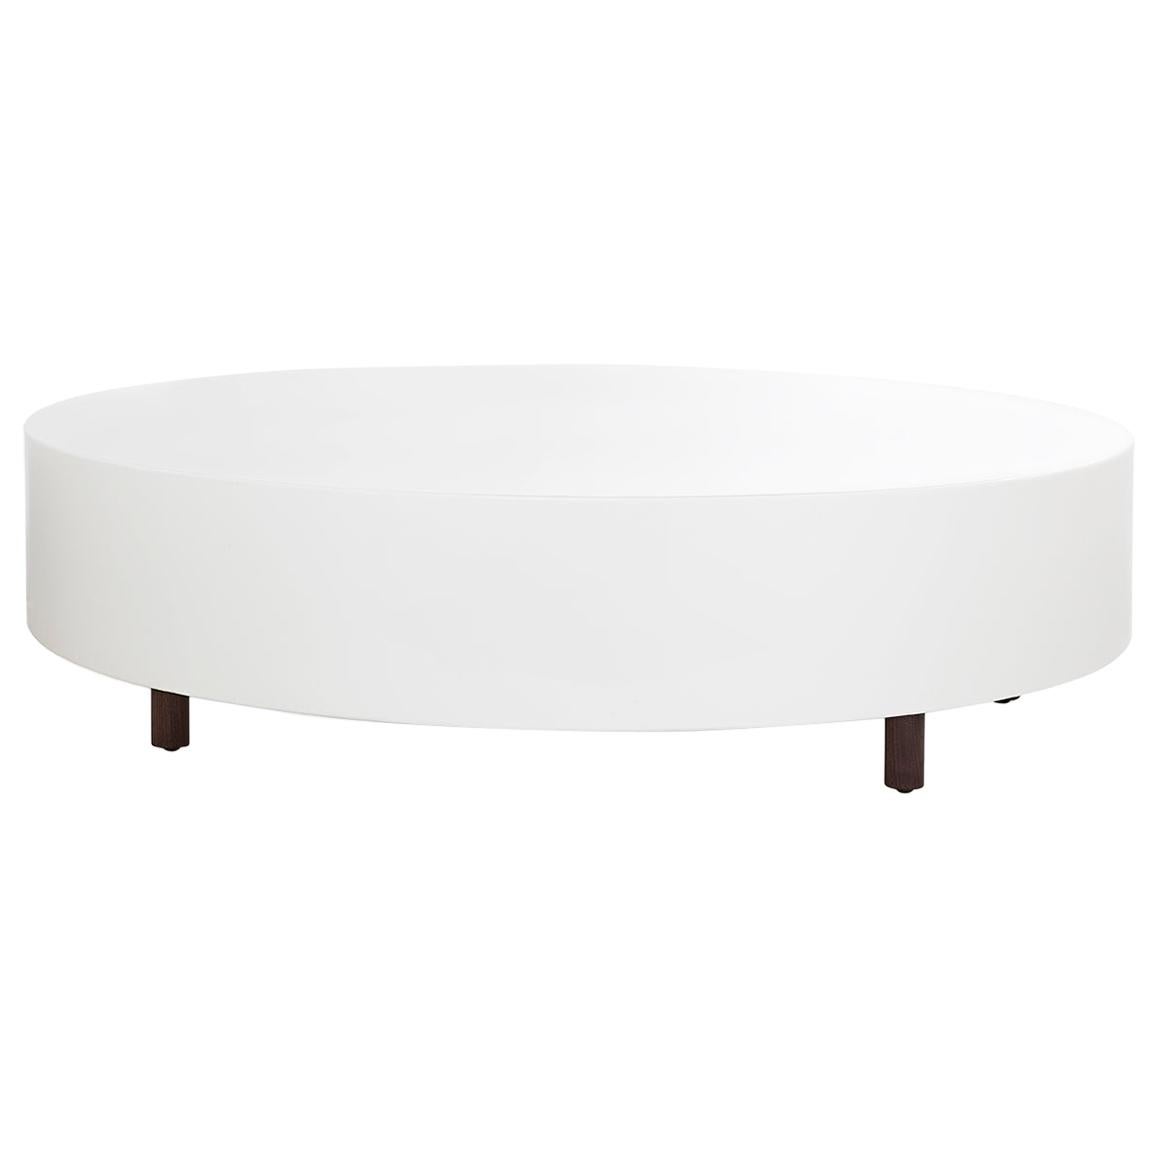 Drop Coffee Table Round Table, Wood Legs White Lacquered